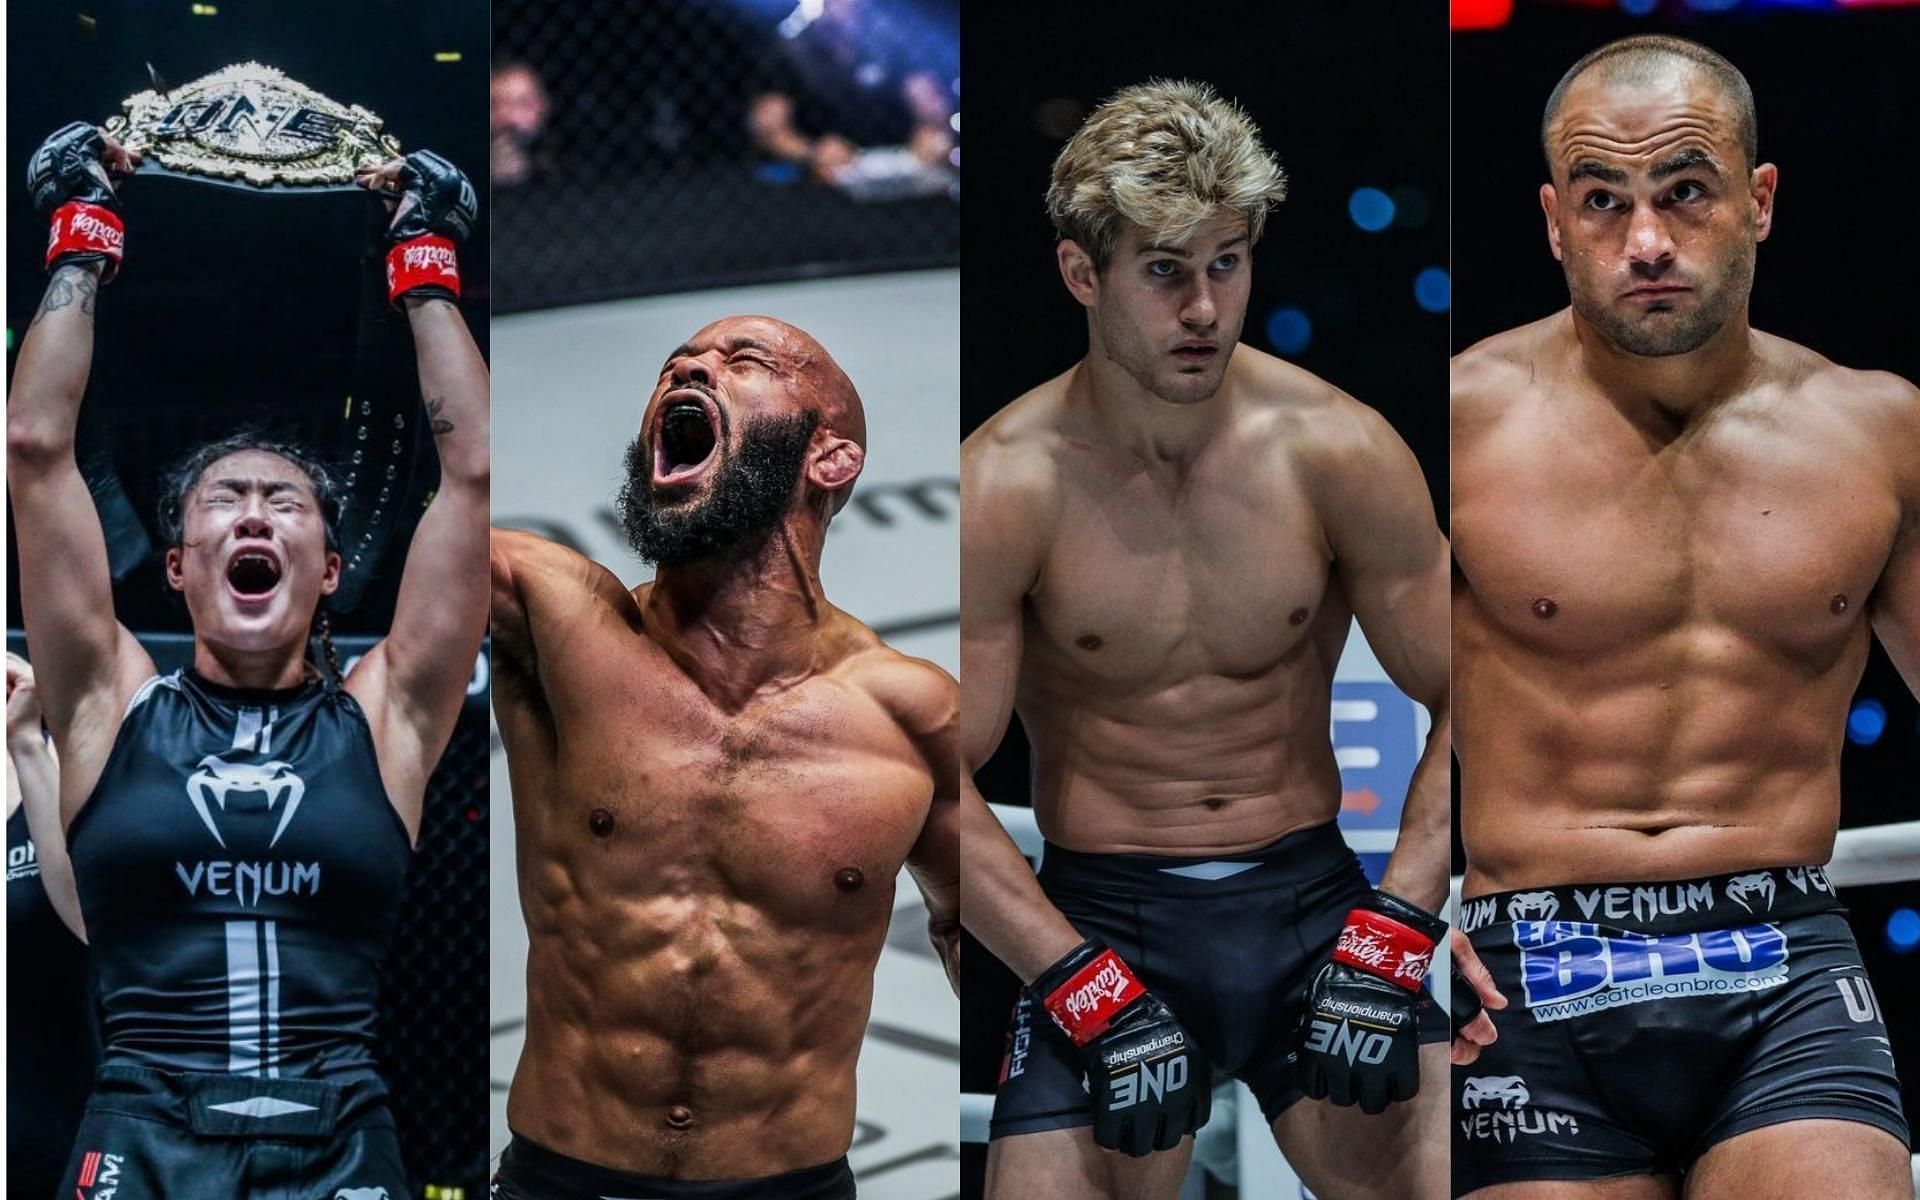 (From left to right) ONE Championship atomweight world champion Angela Lee, Demetrious Johnson, Sage Northcutt, and Eddie Alvarez are all confirmed to be part of ONE: X on March 26. (Images courtesy of ONE Championship)